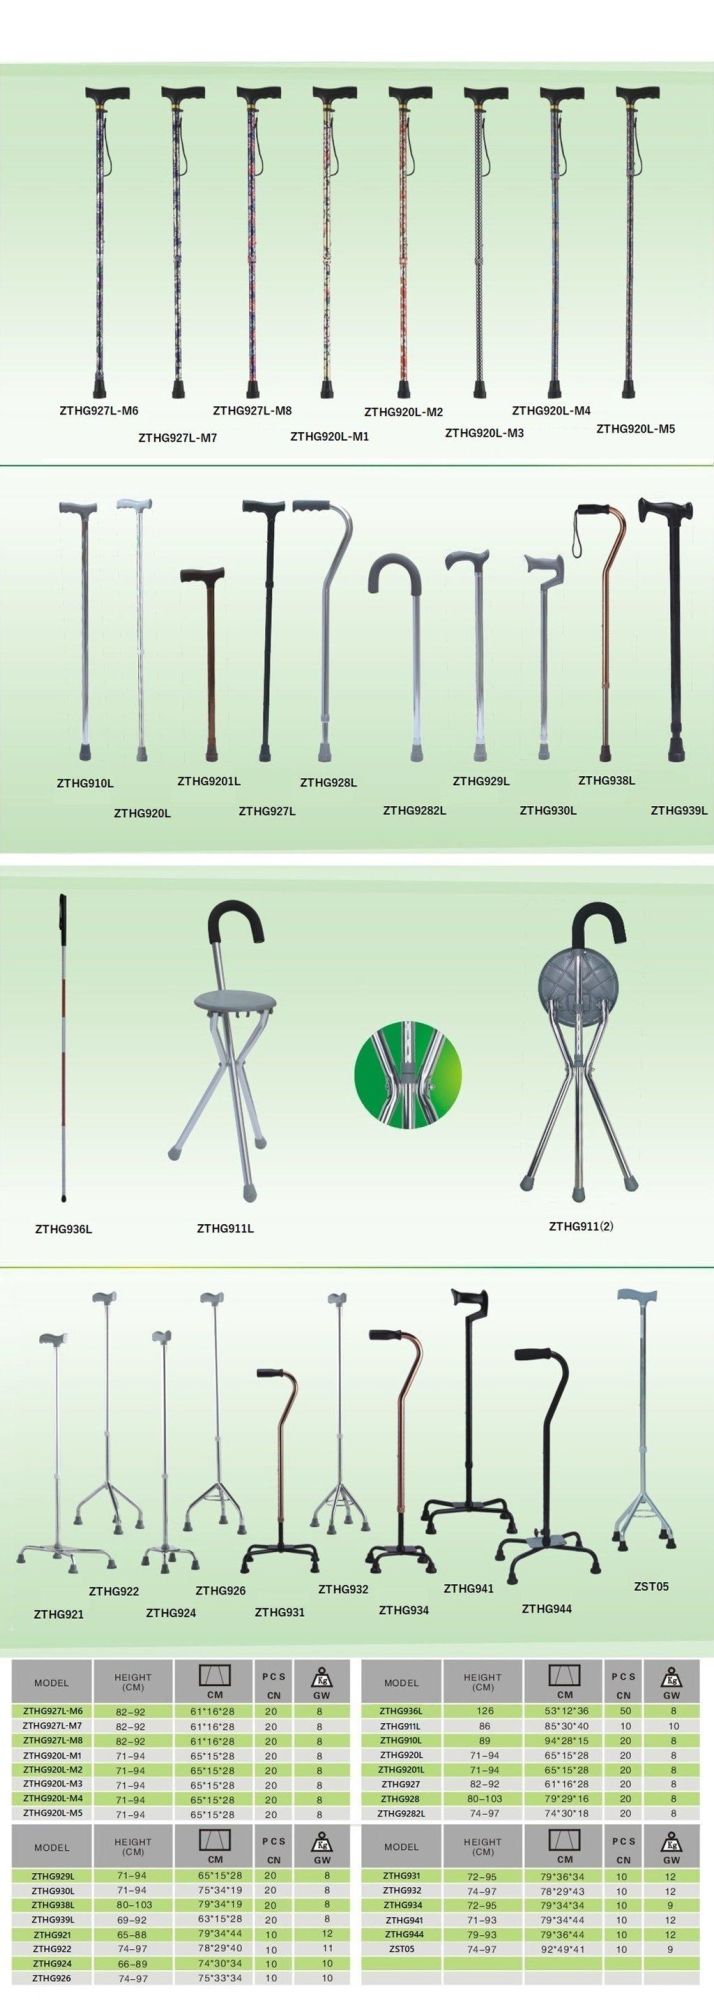 Non-Slip Hand Grip and Non-Slip Foot Pad Steel Lightweight Easy Carry Portable Adjustable Height Walking Cane Weight Capacity 100kgs for Elderly People Crutch